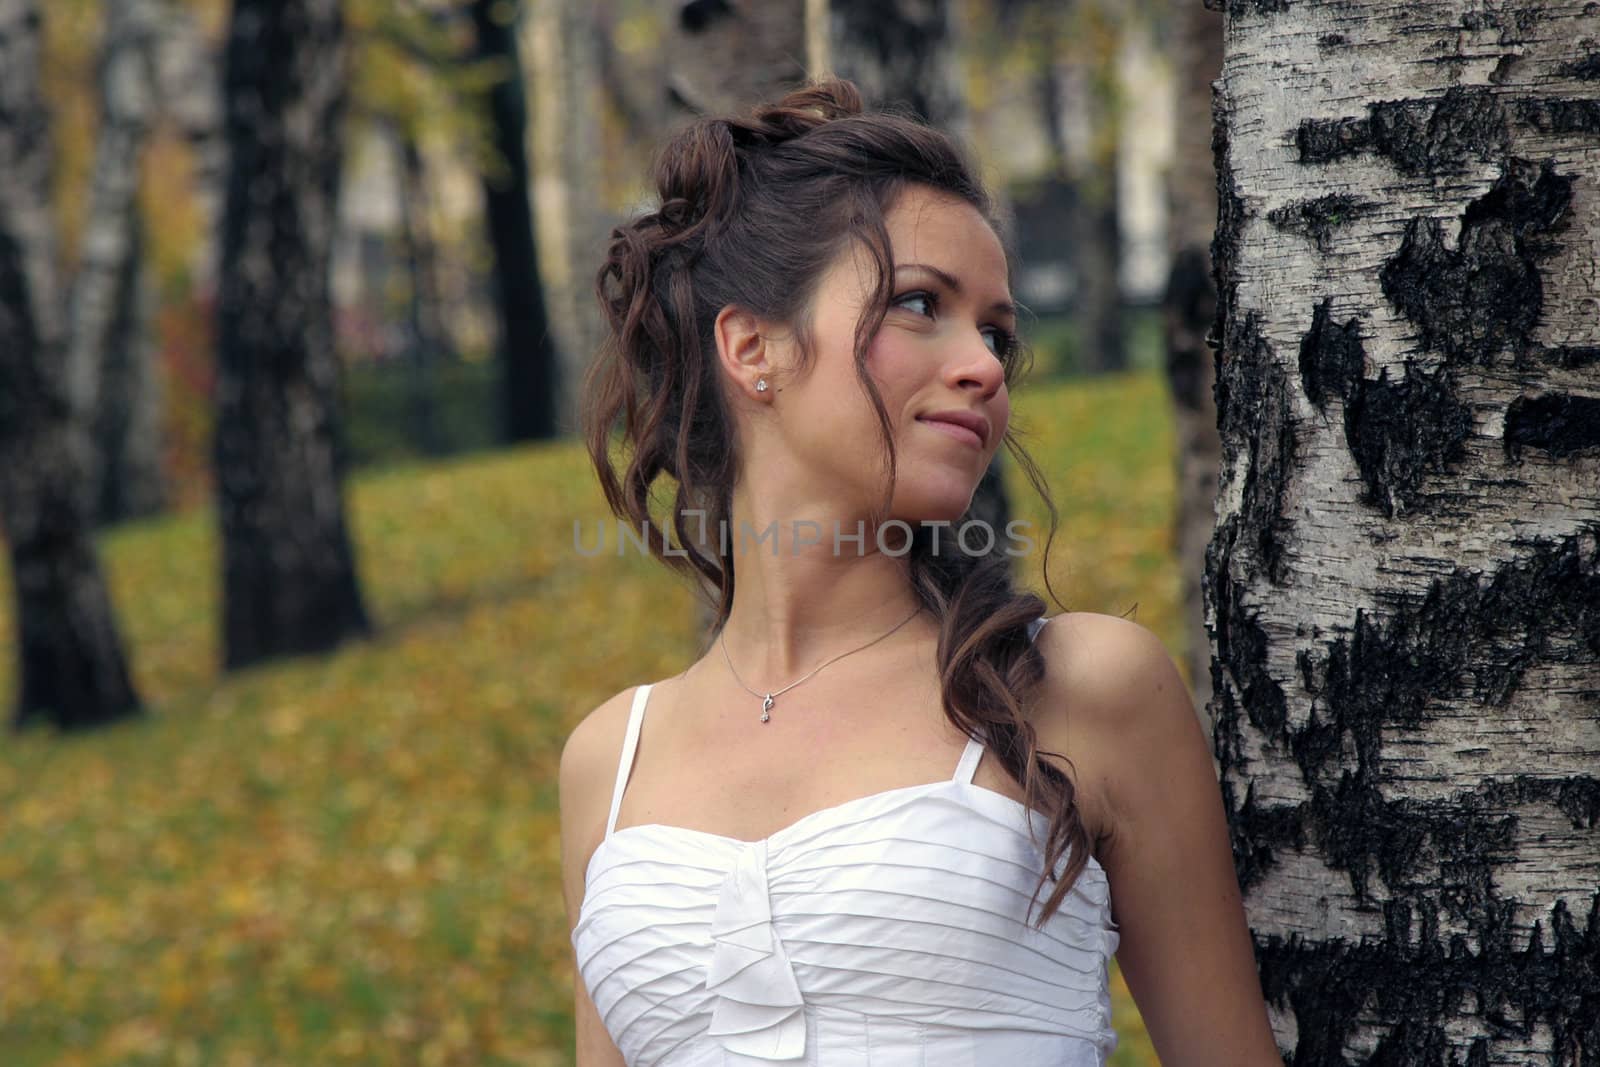 The bride walks in a birchwood in the autumn